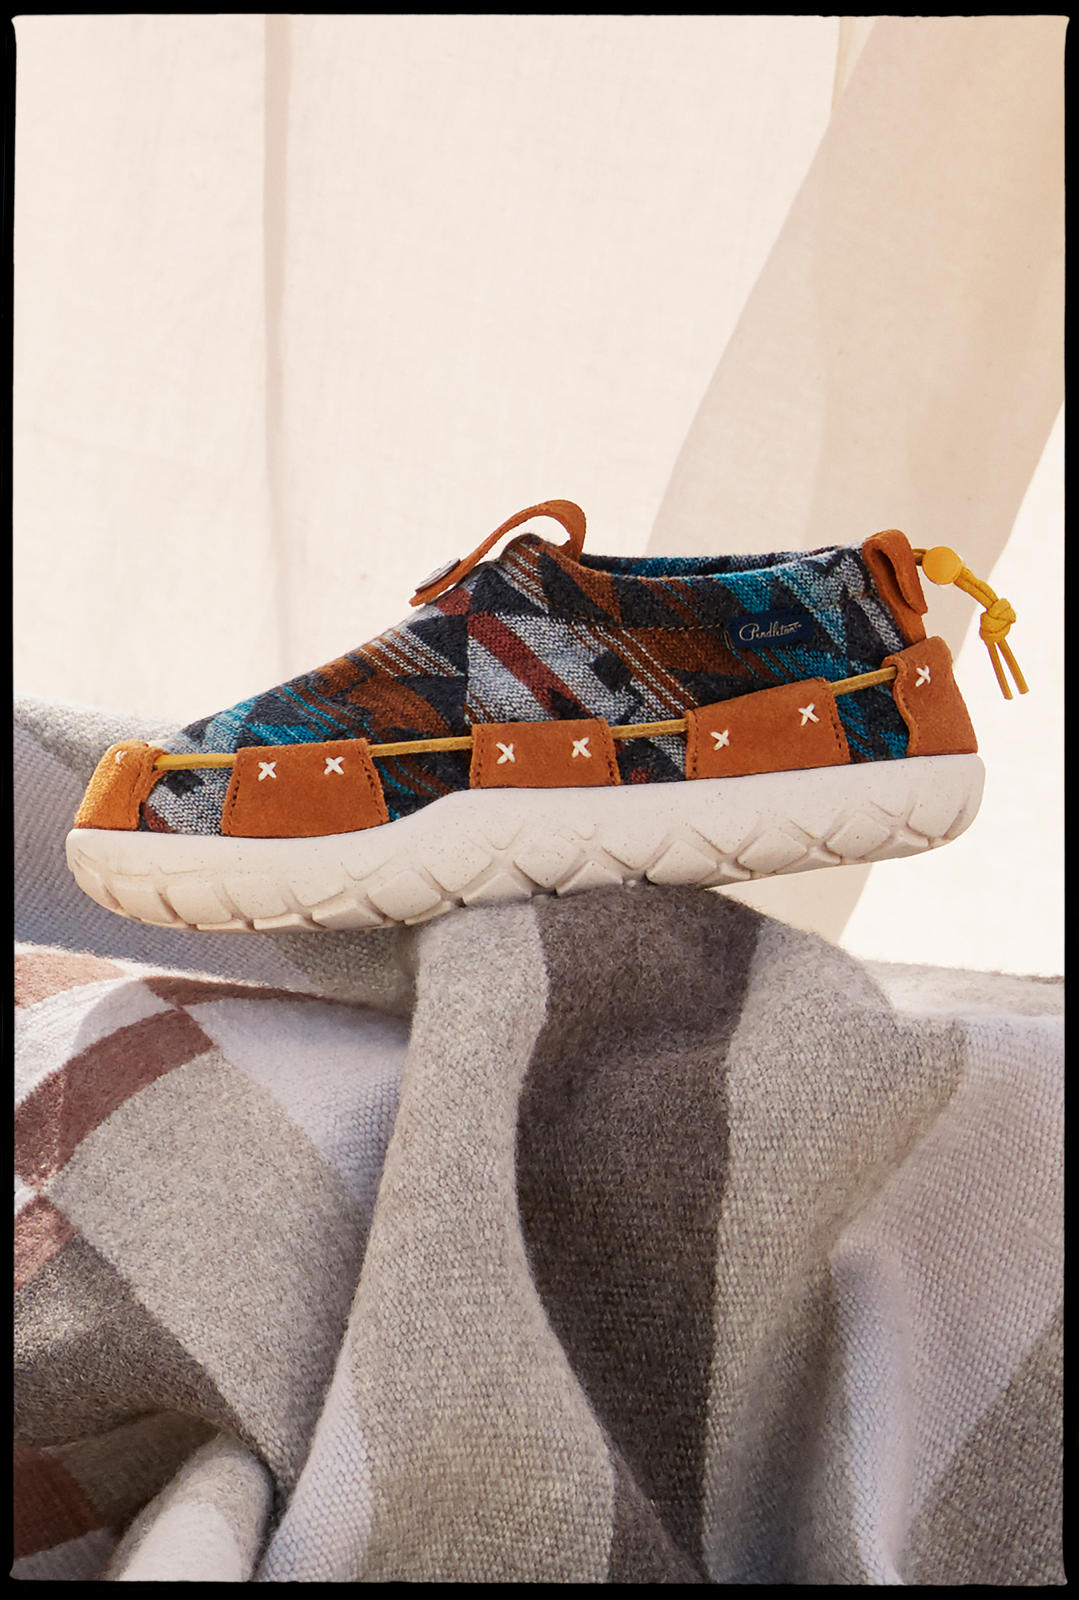 Nike N7 Collection Celebrates Its 10th Anniversary with Pendleton